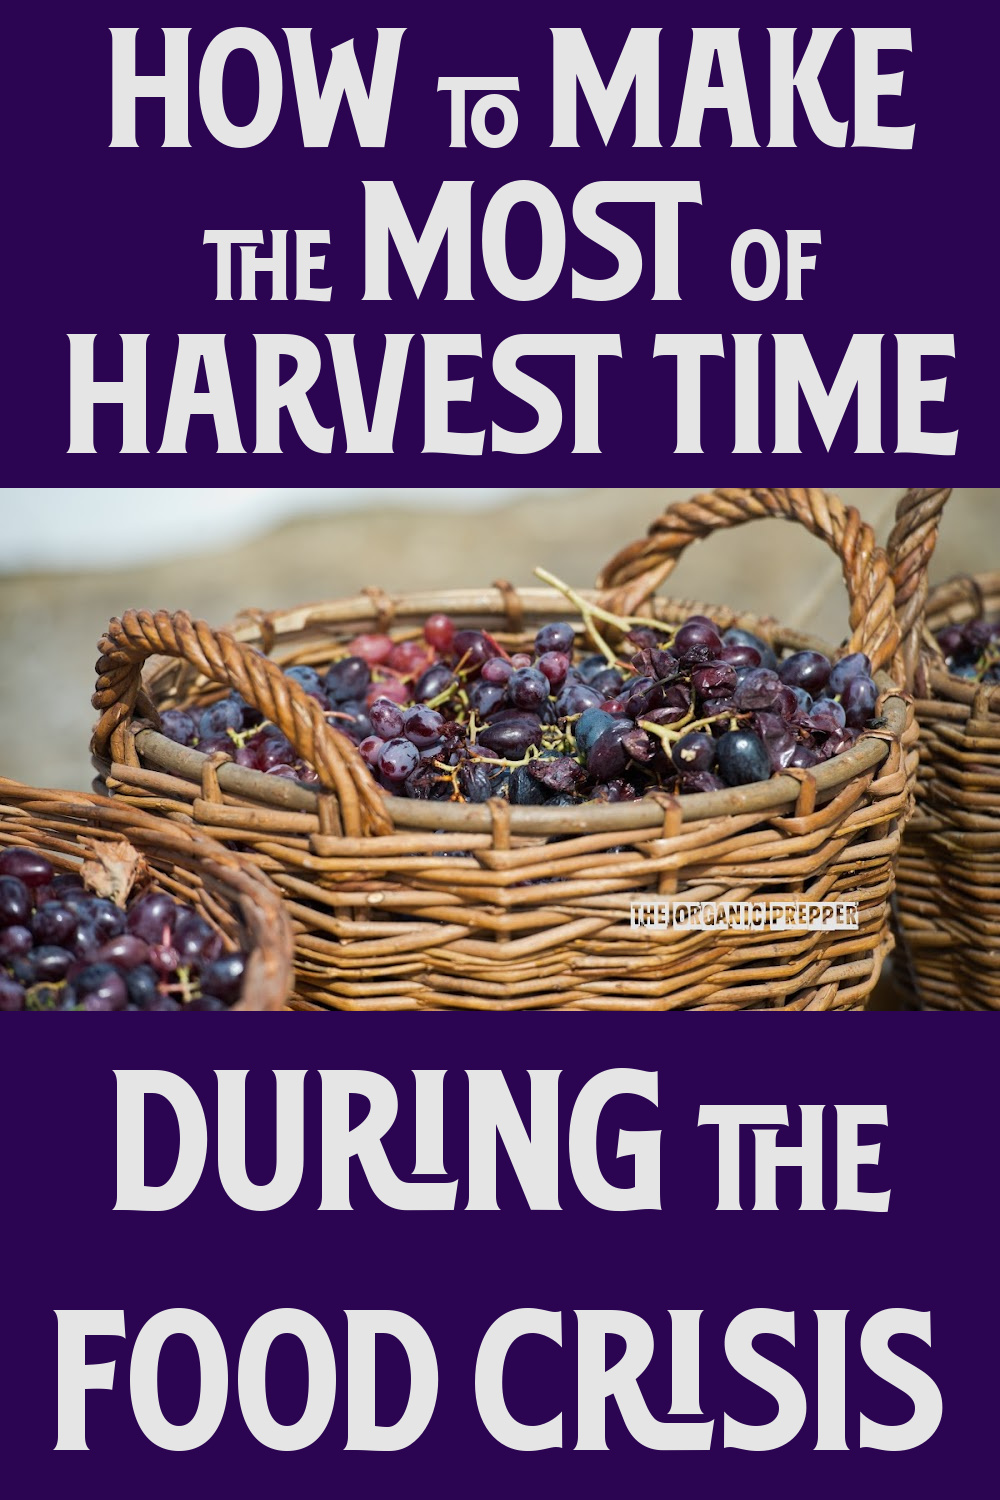 How to Make the Most of Harvest Time During the Food Crisis